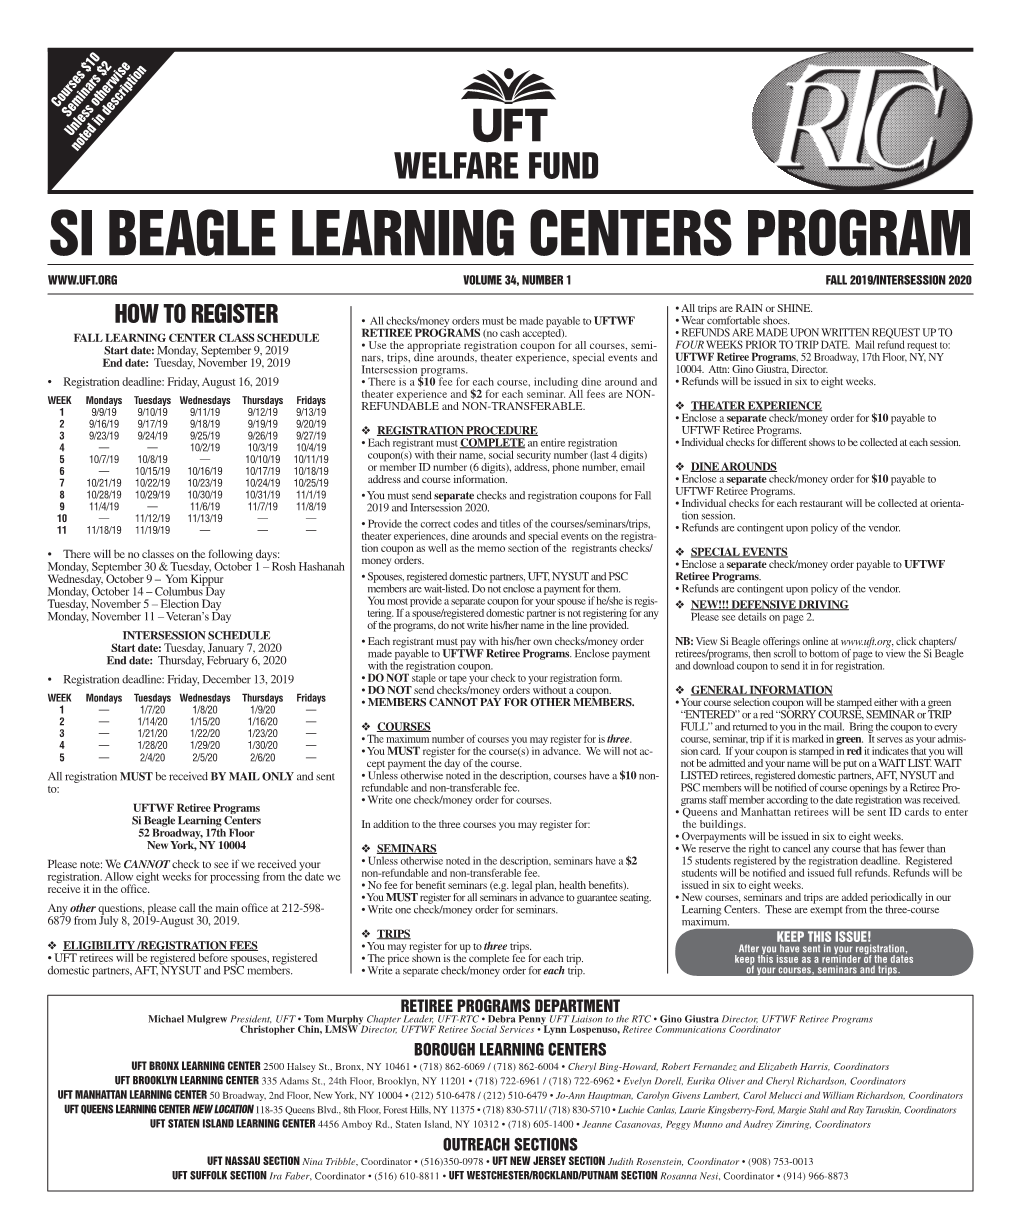 Si Beagle Learning Centers Program Volume 34, Number 1 Fall 2019/Intersession 2020